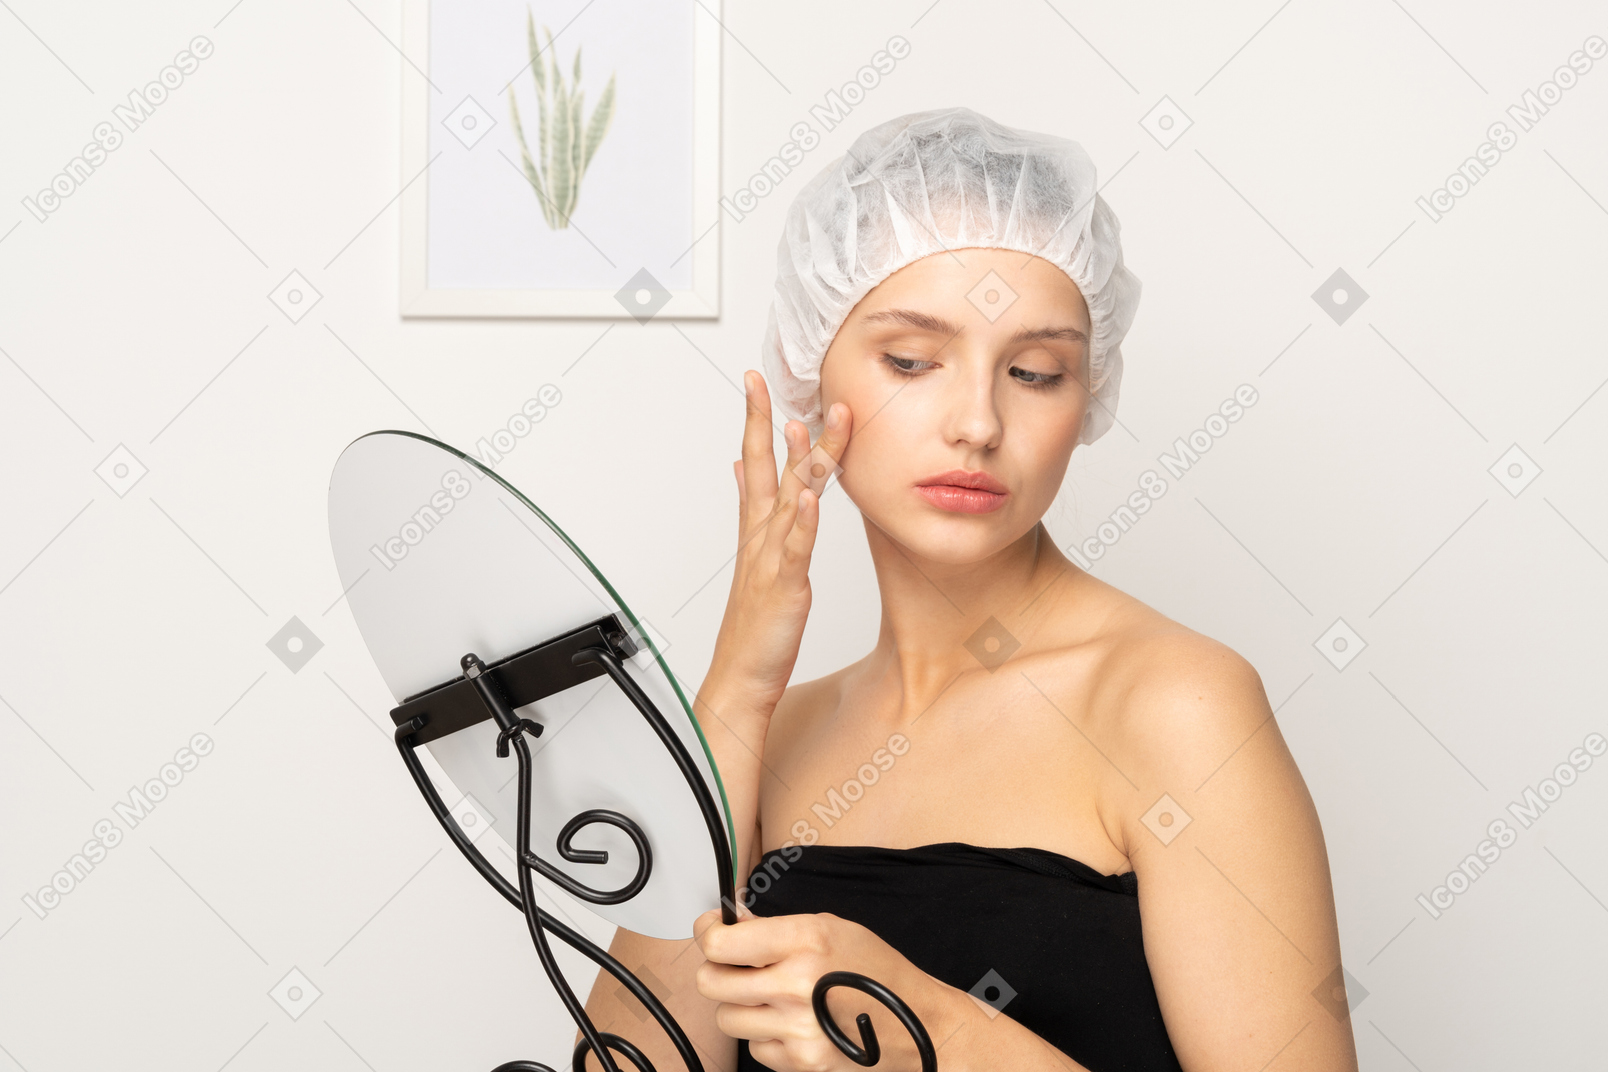 Young woman in surgical cap looking at her reflection in the mirror